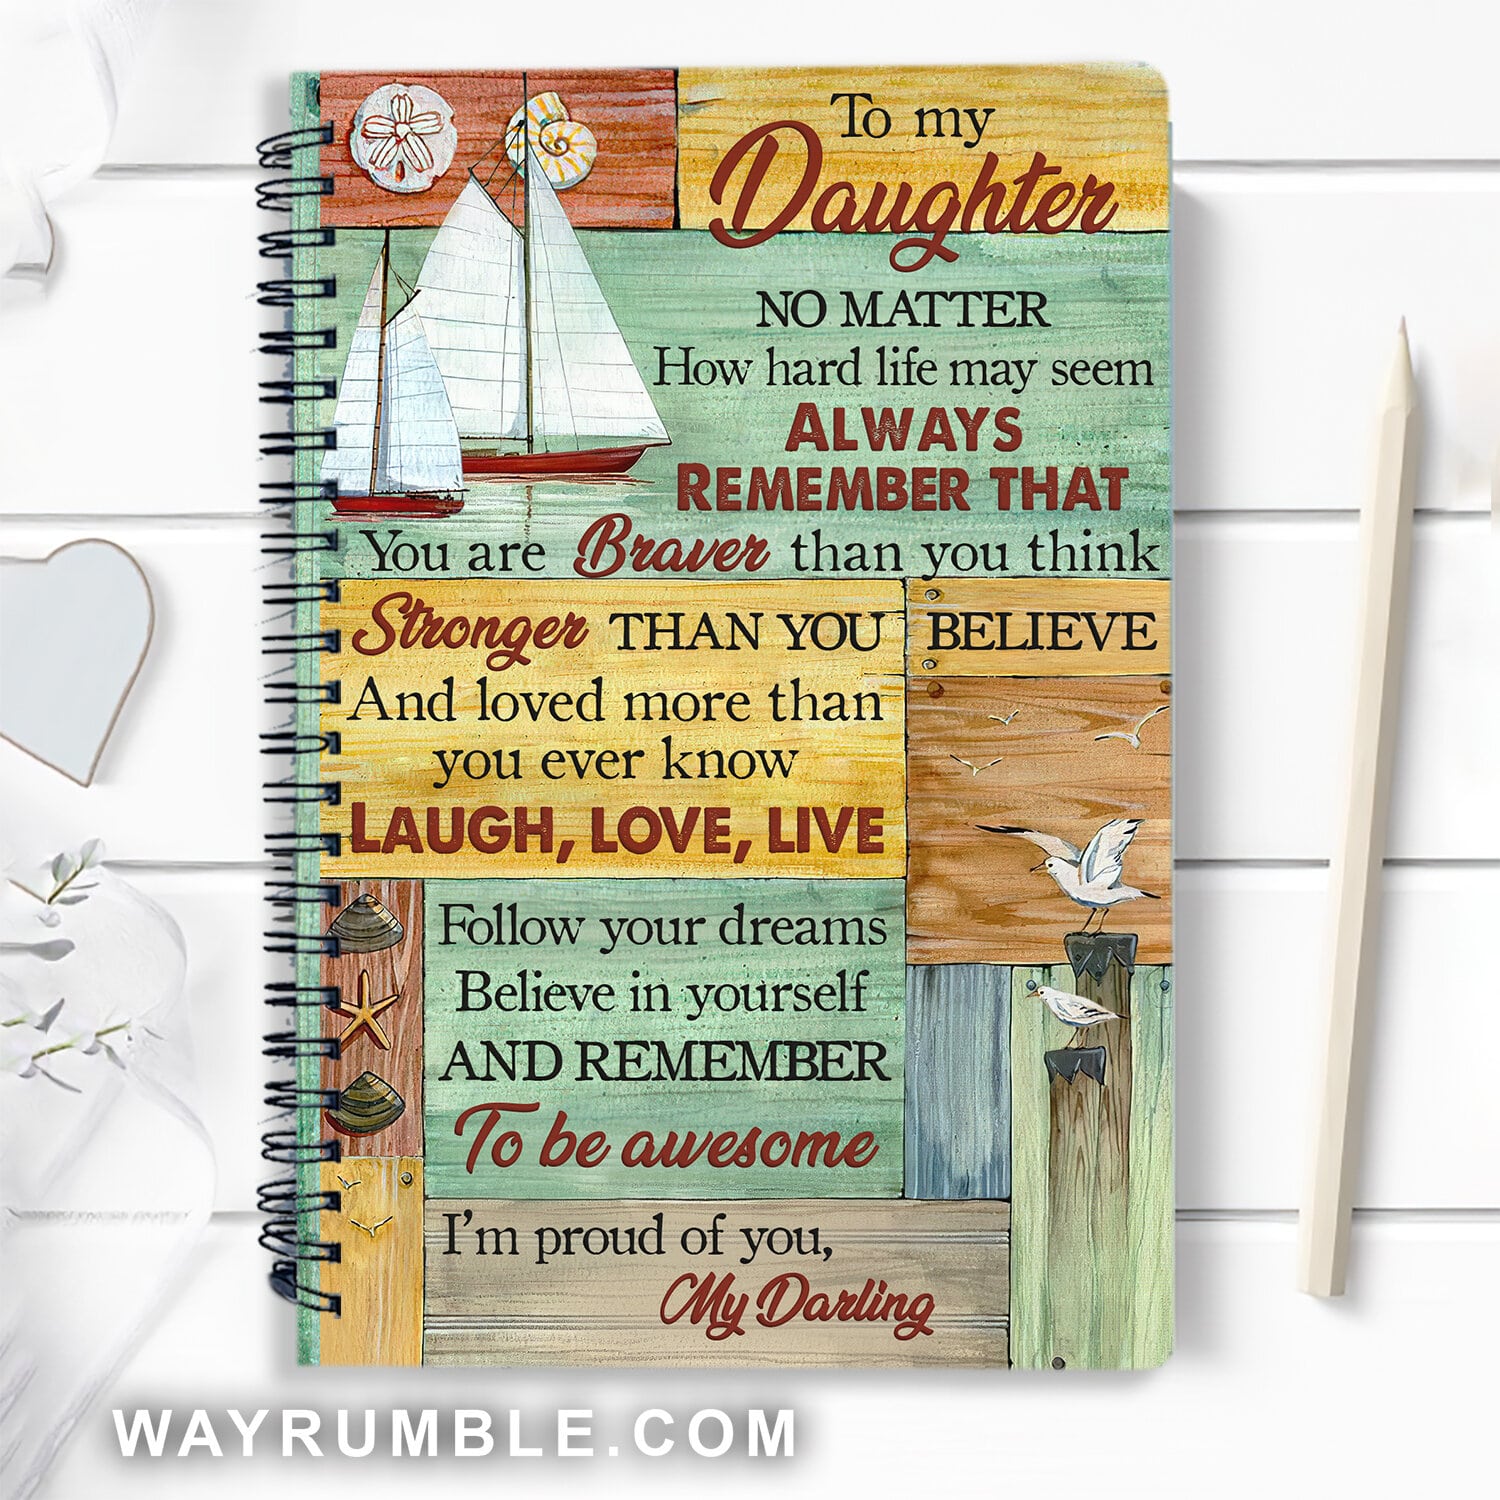 Follow your dreams believe in yourself - To my daughter, Boat, Dove Spiral Journal